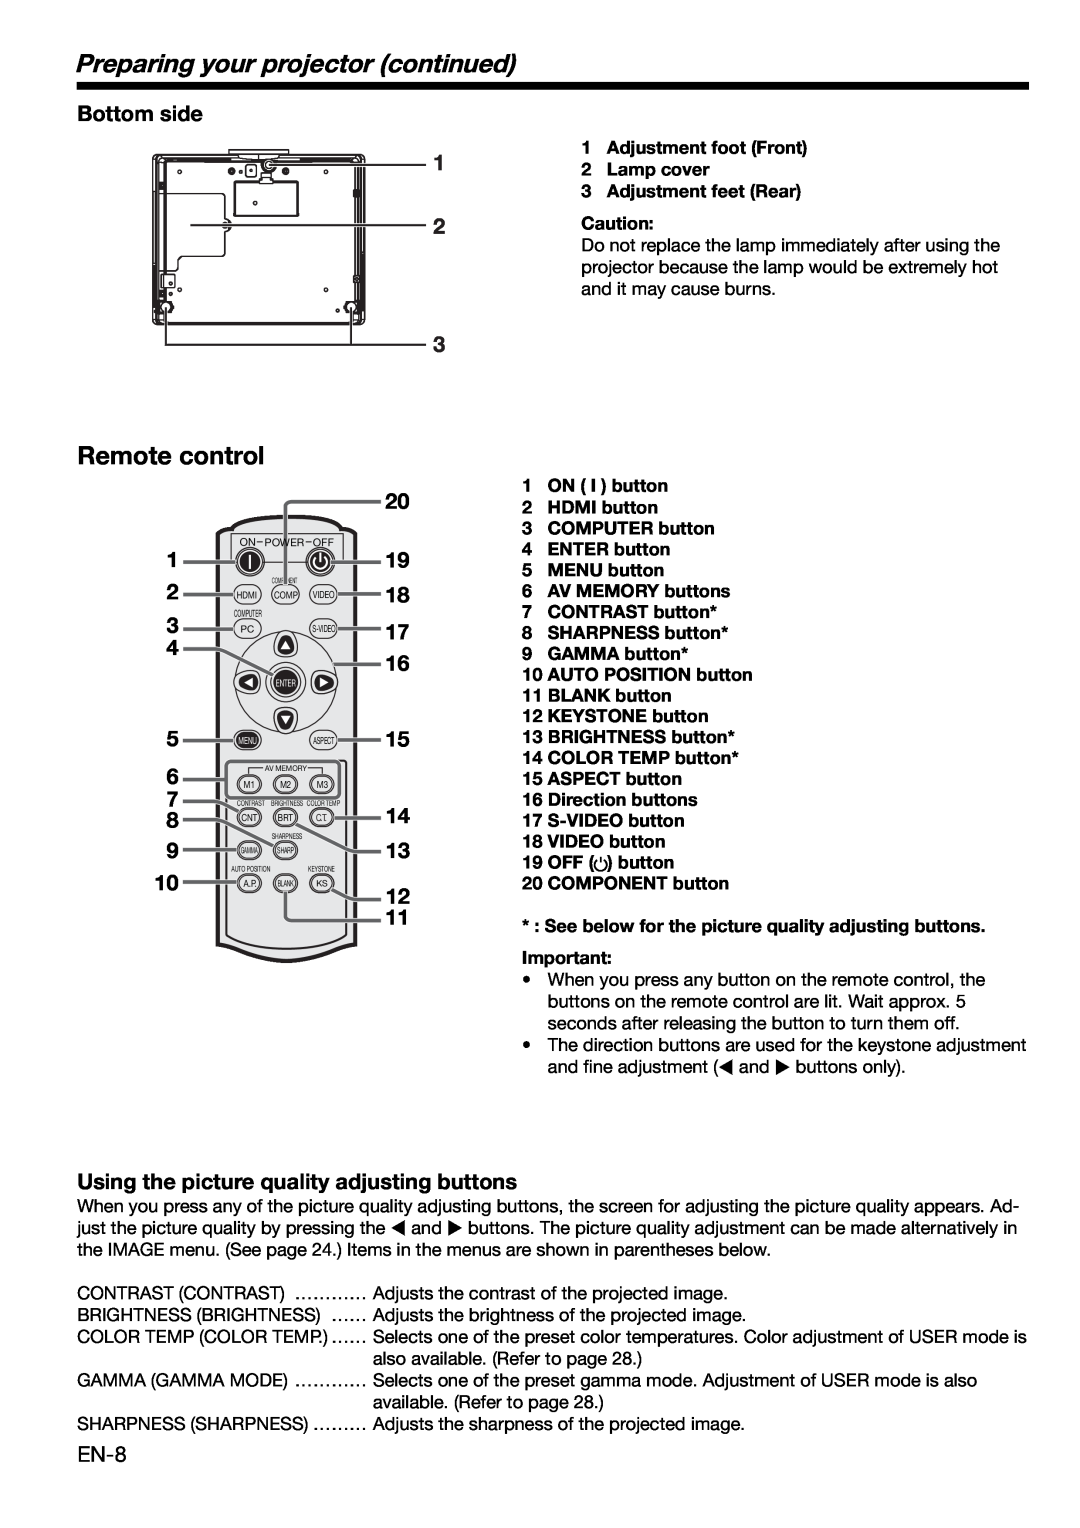 Mitsubishi HC1100 user manual Preparing your projector continued, Remote control, Bottom side 